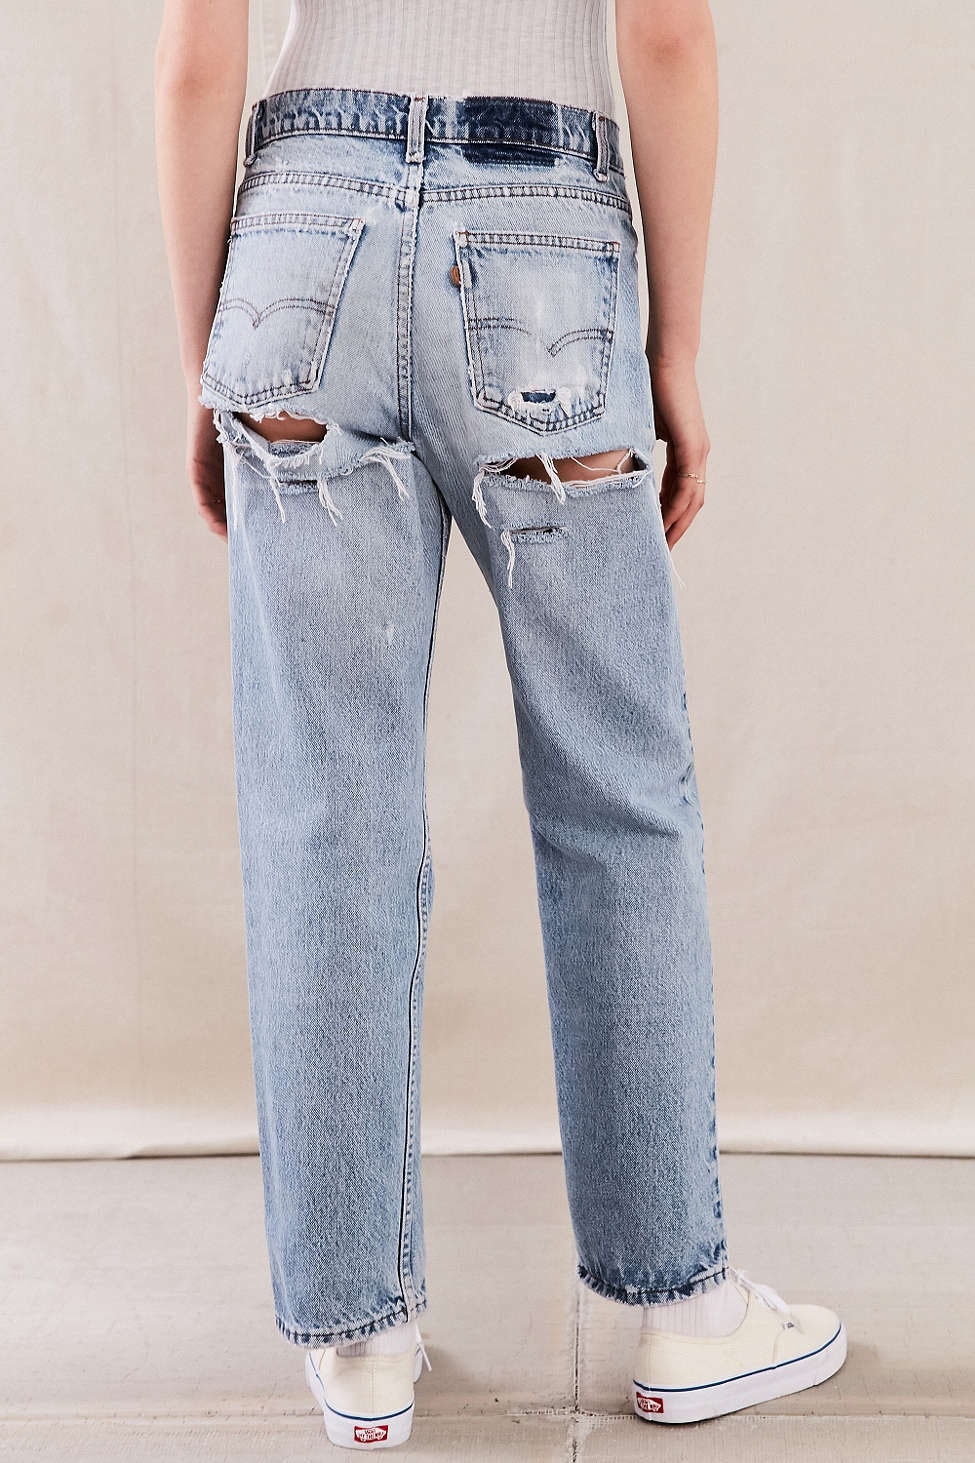 jeans with rips in the front and back